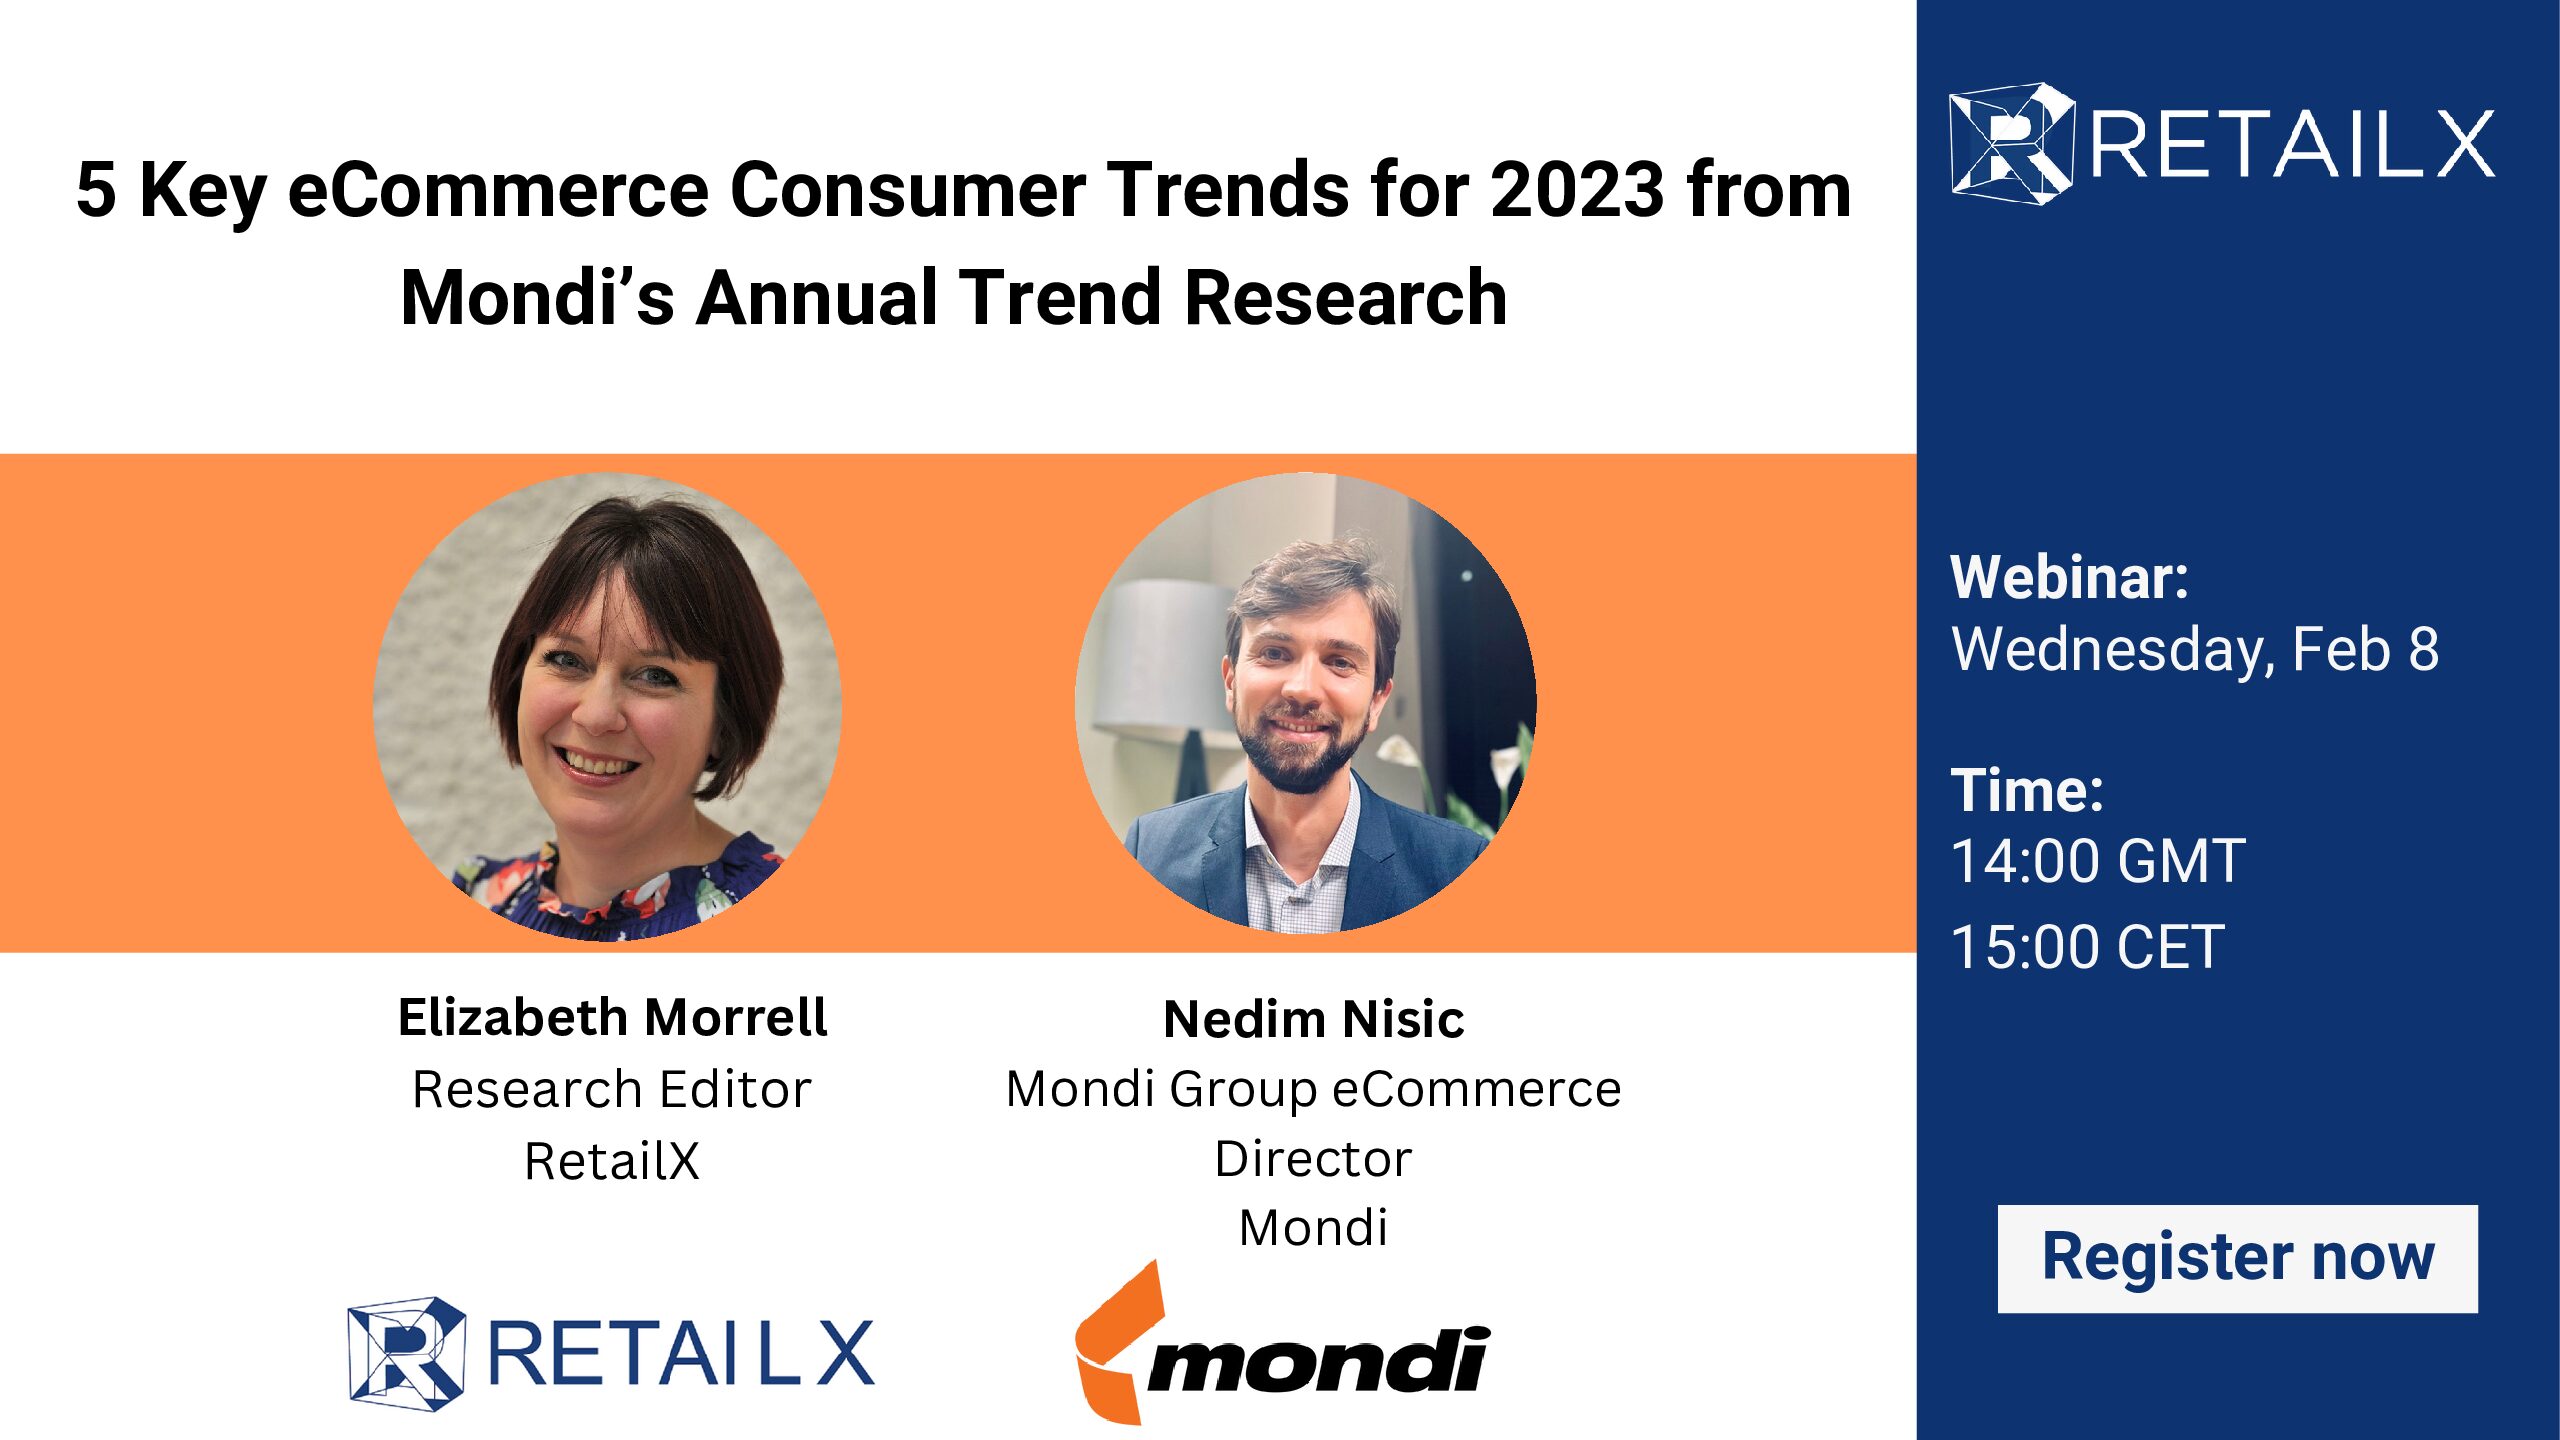 5 Key Ecommerce Consumer Trends for 2023 from Mondi’s Annual Trend Research